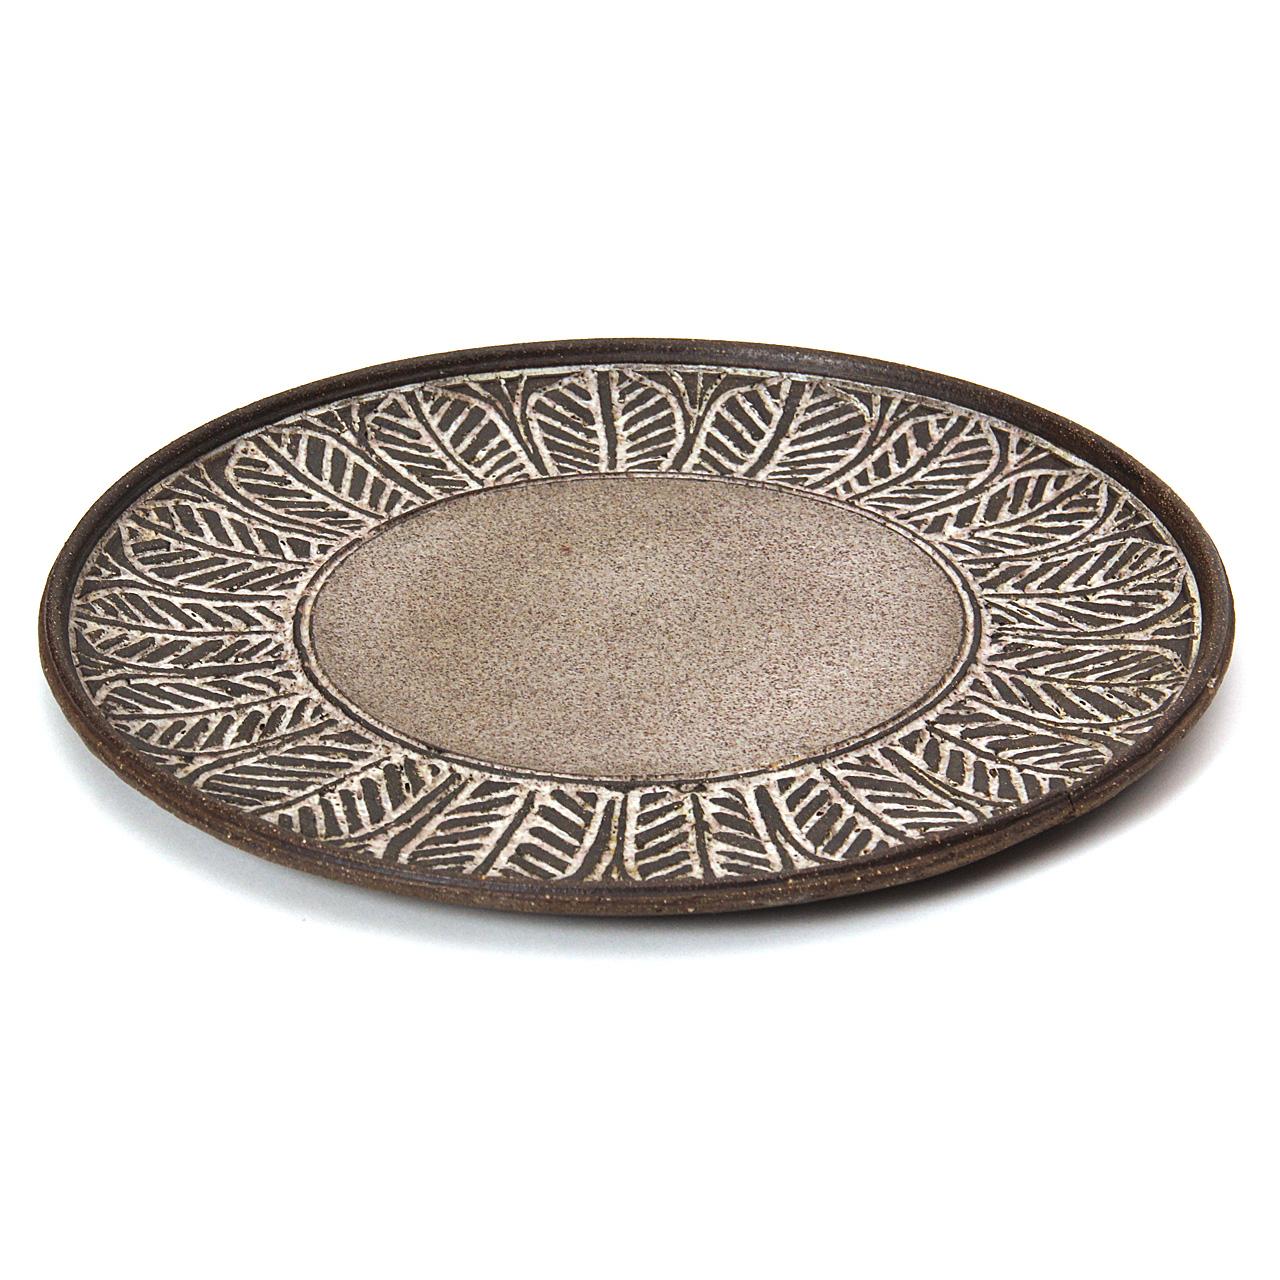 A hand-thrown earthenware ceramic platter with incised leaf motif and stone gray glaze. Signed 